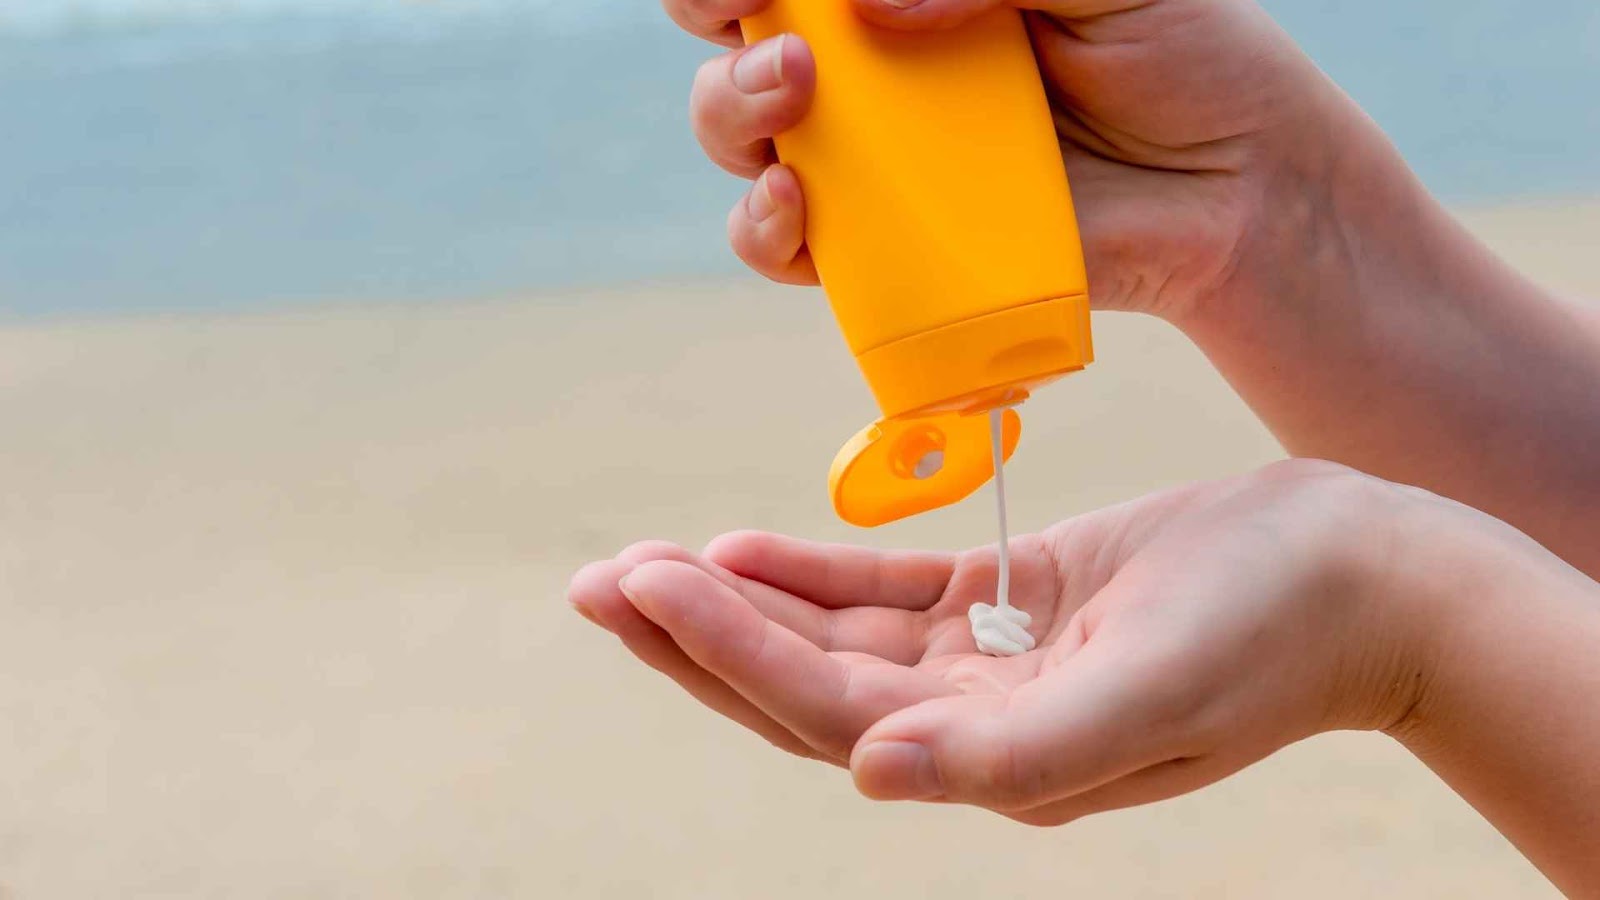 sunscreen being squeezed into a hand